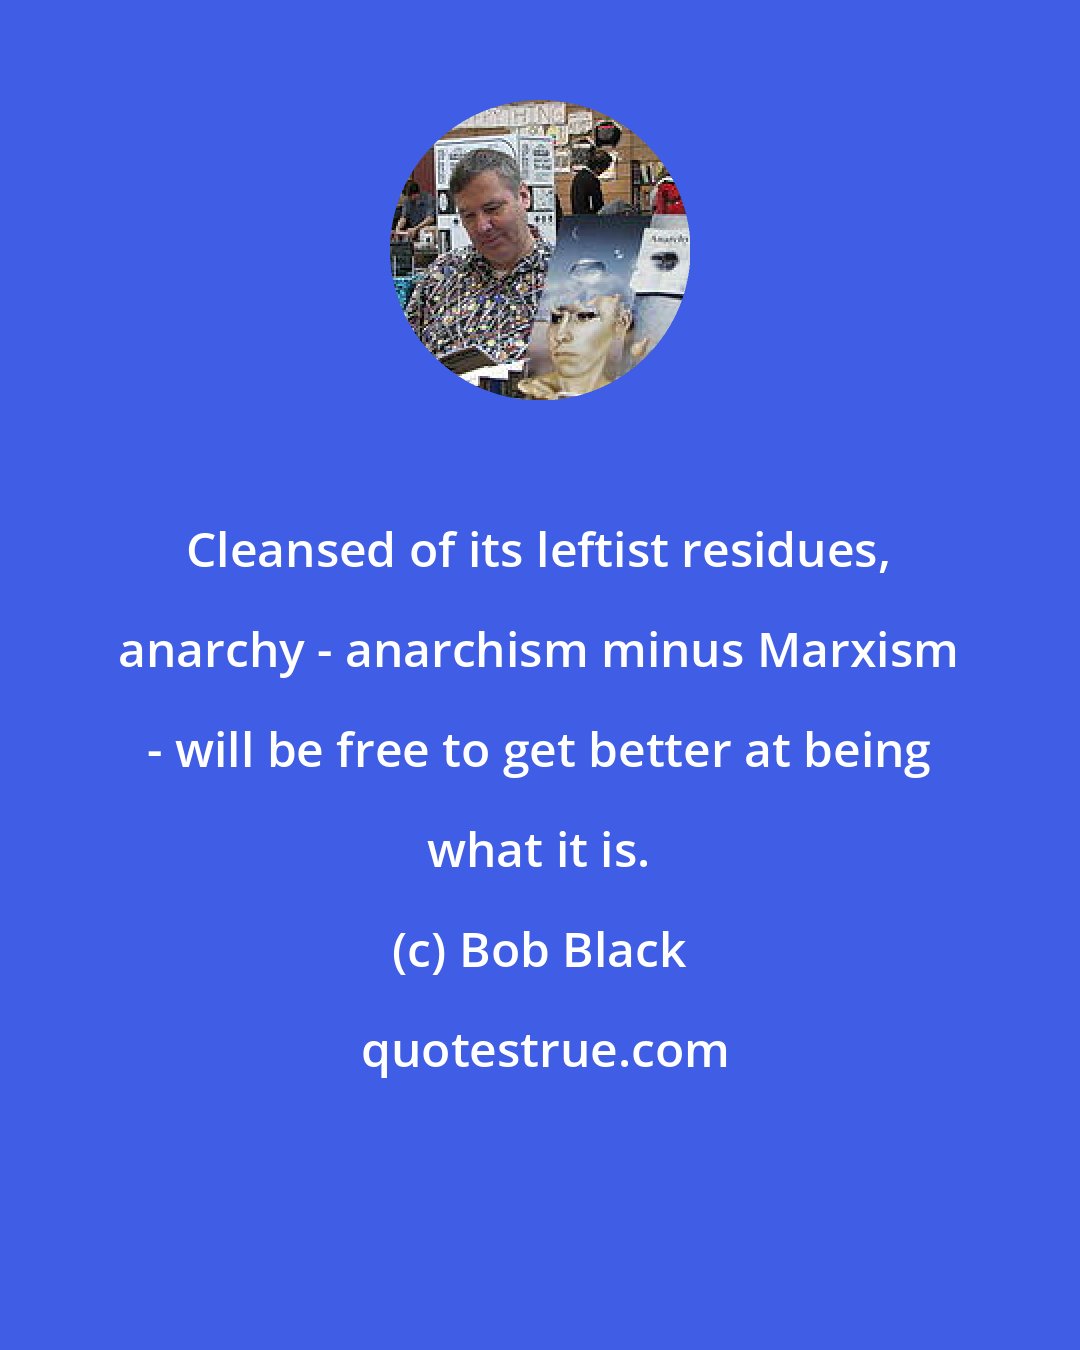 Bob Black: Cleansed of its leftist residues, anarchy - anarchism minus Marxism - will be free to get better at being what it is.